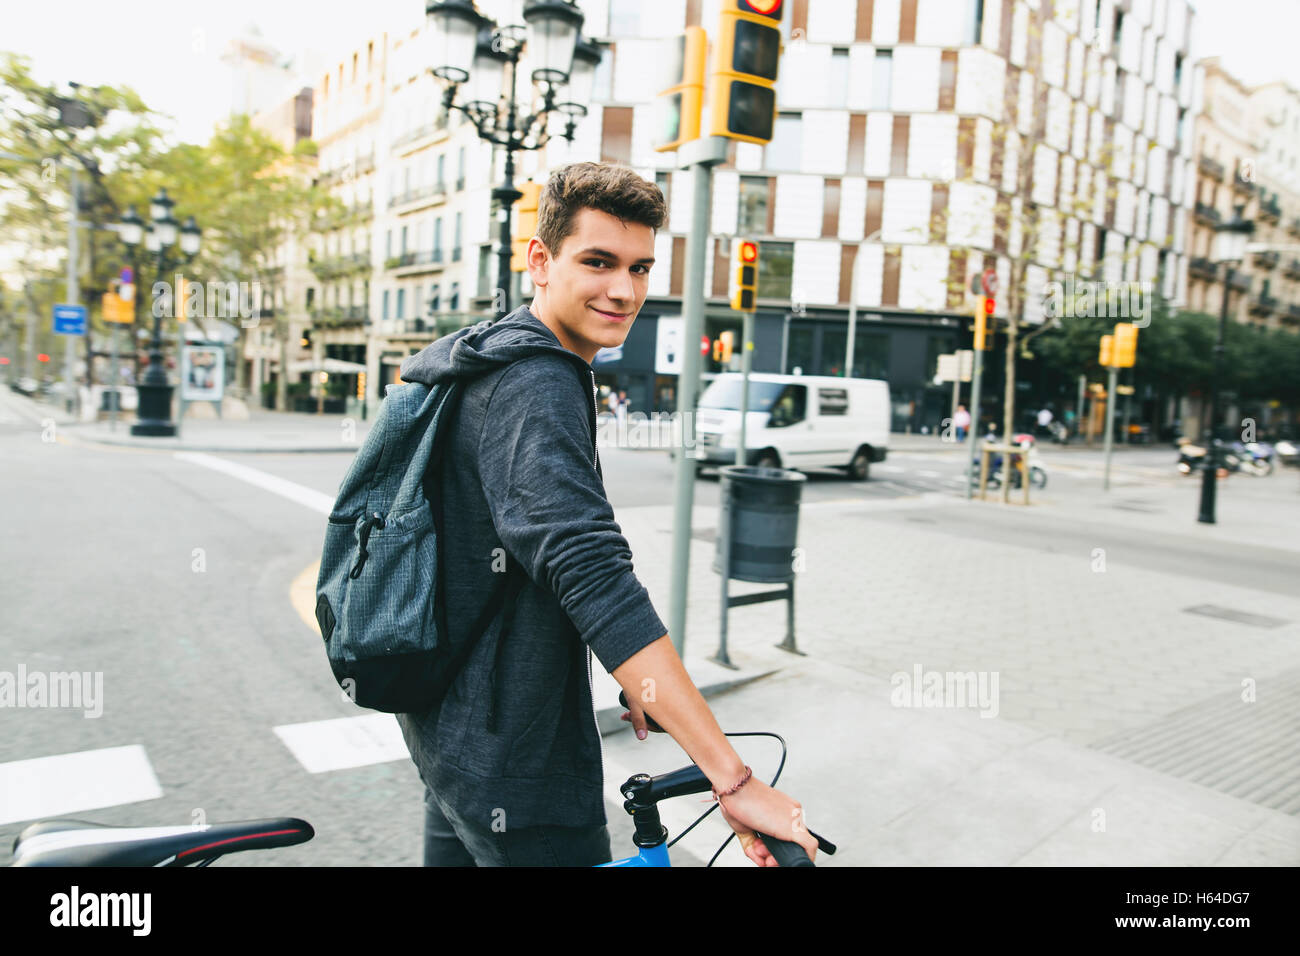 Teenager with a fixie bike in the city Stock Photo